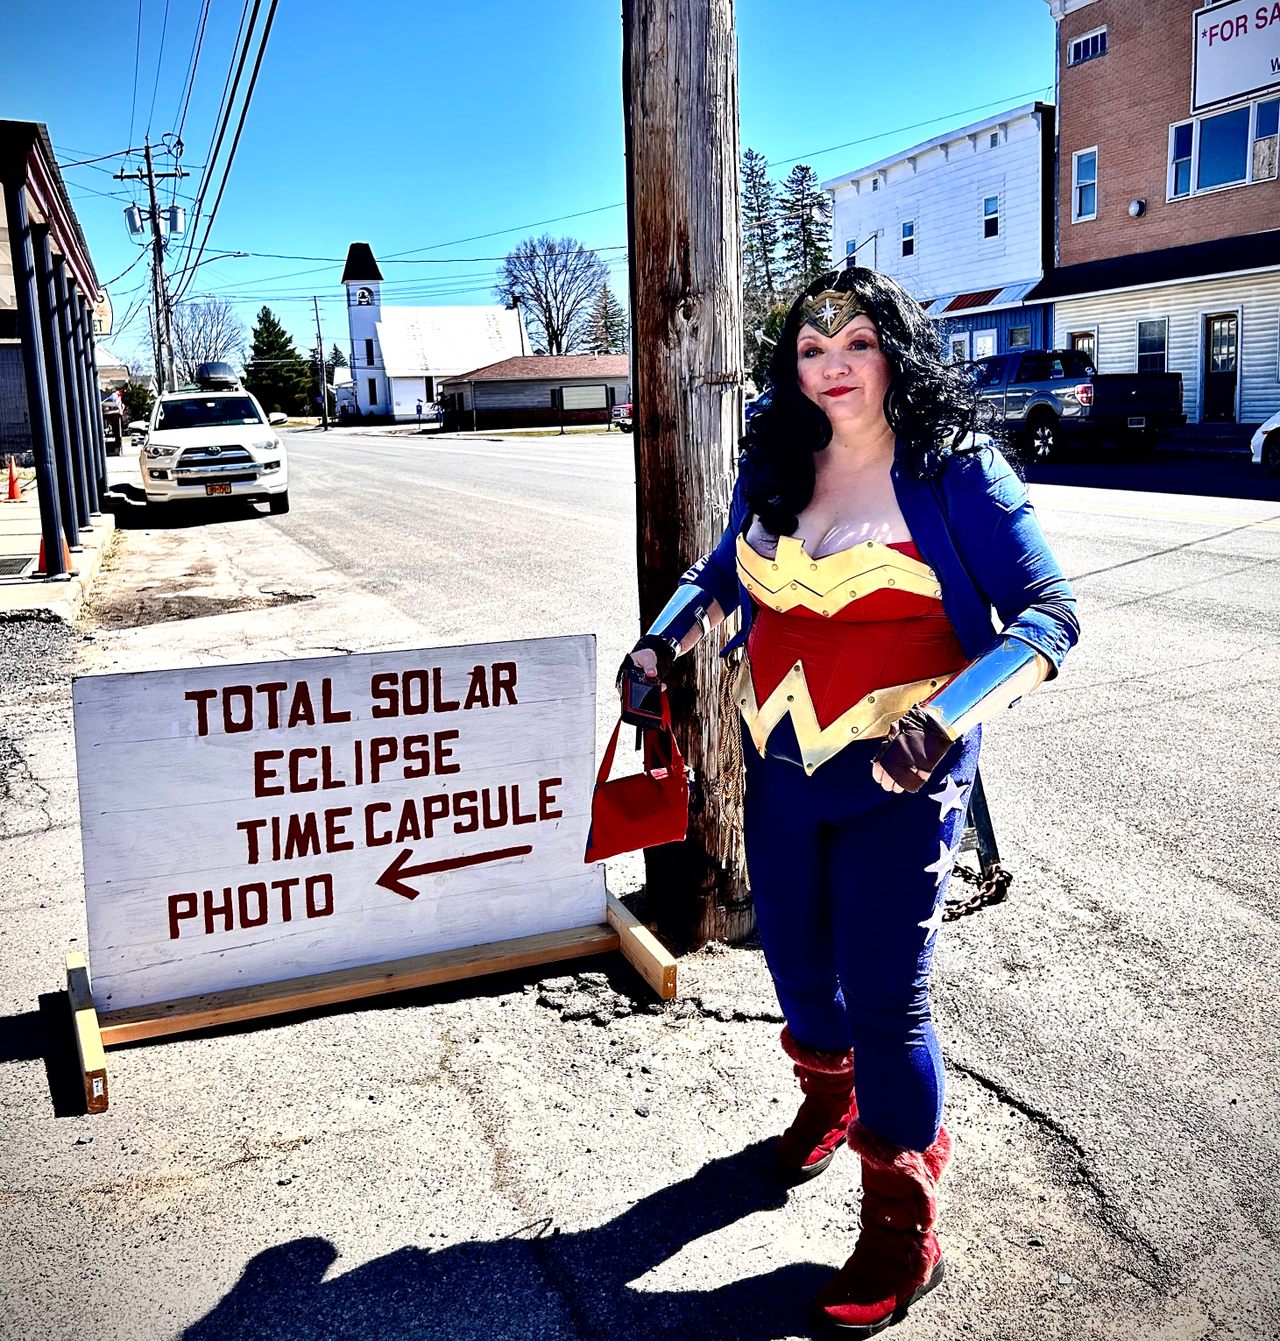 At the eclipse time capsule event in Norfolk, New York, Wonder Woman gets ready for her close-up.